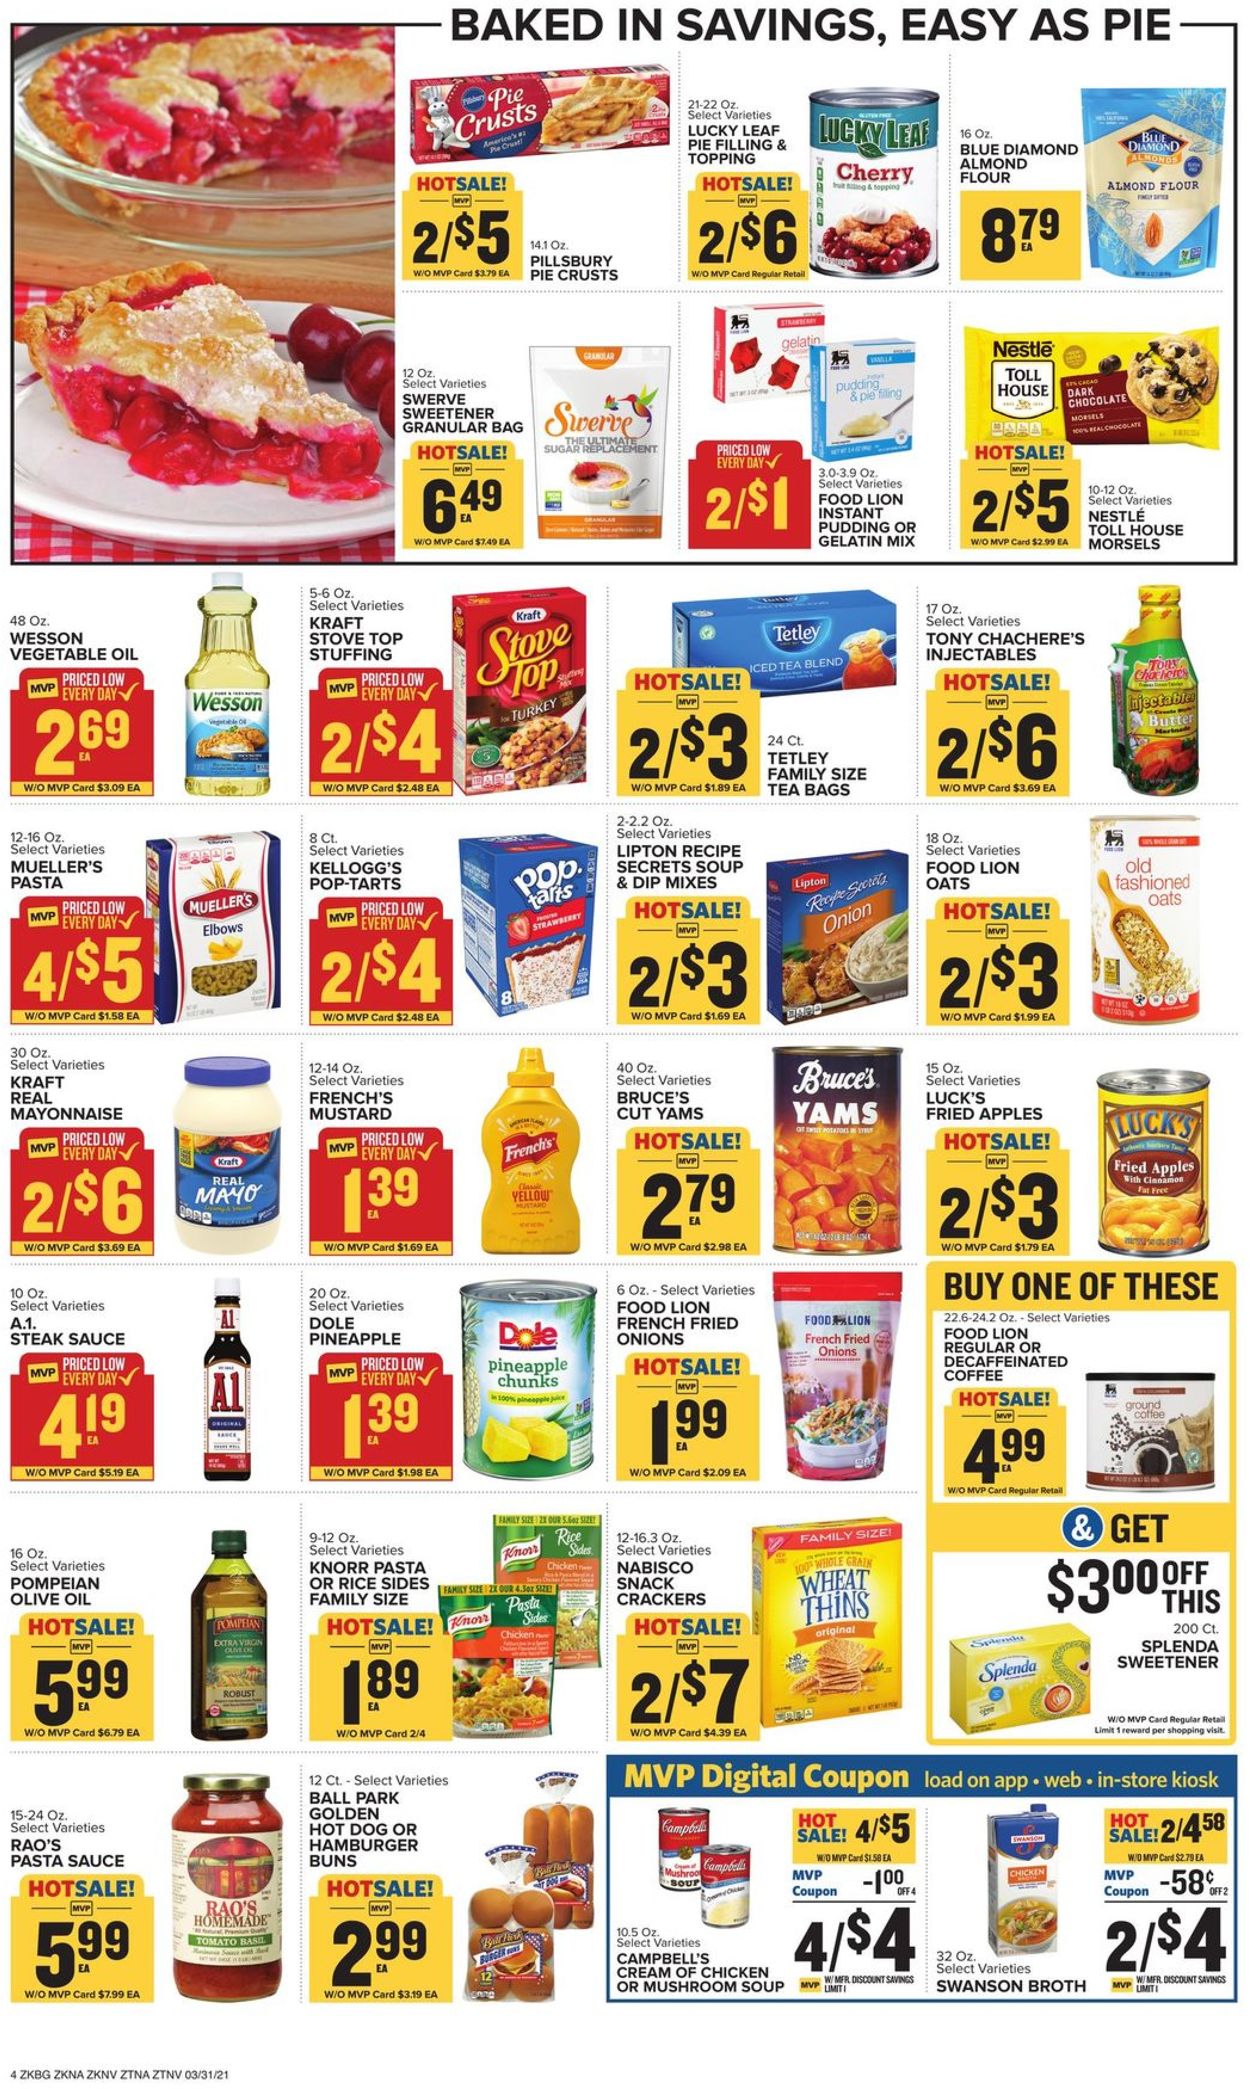 Food Lion Easter 2021 ad Weekly Ad Circular - valid 03/31-04/06/2021 (Page 6)